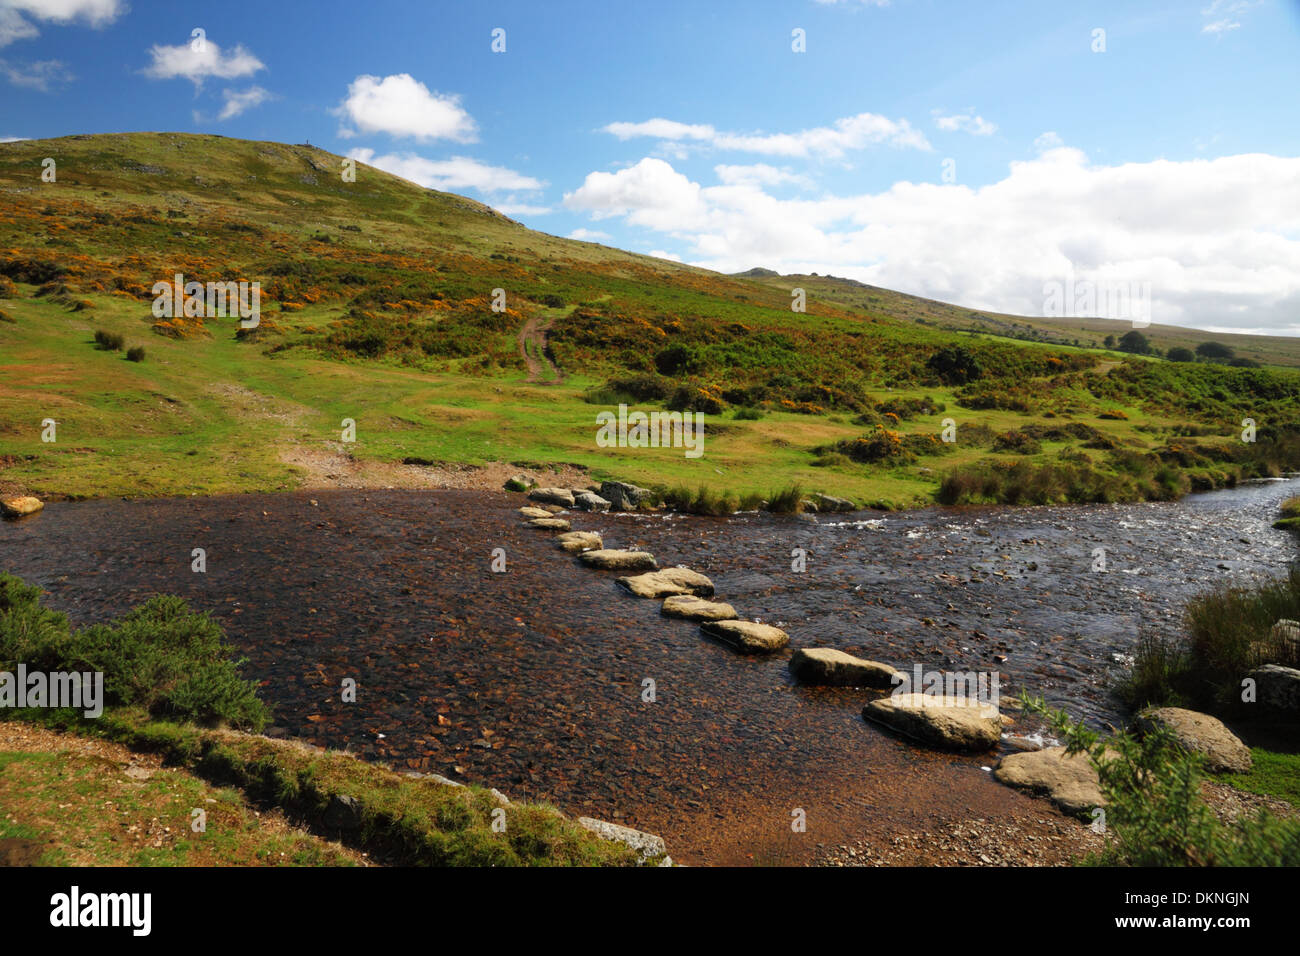 Stepping stones across a moorland stream with a view of Dartmoor in the background. Stock Photo